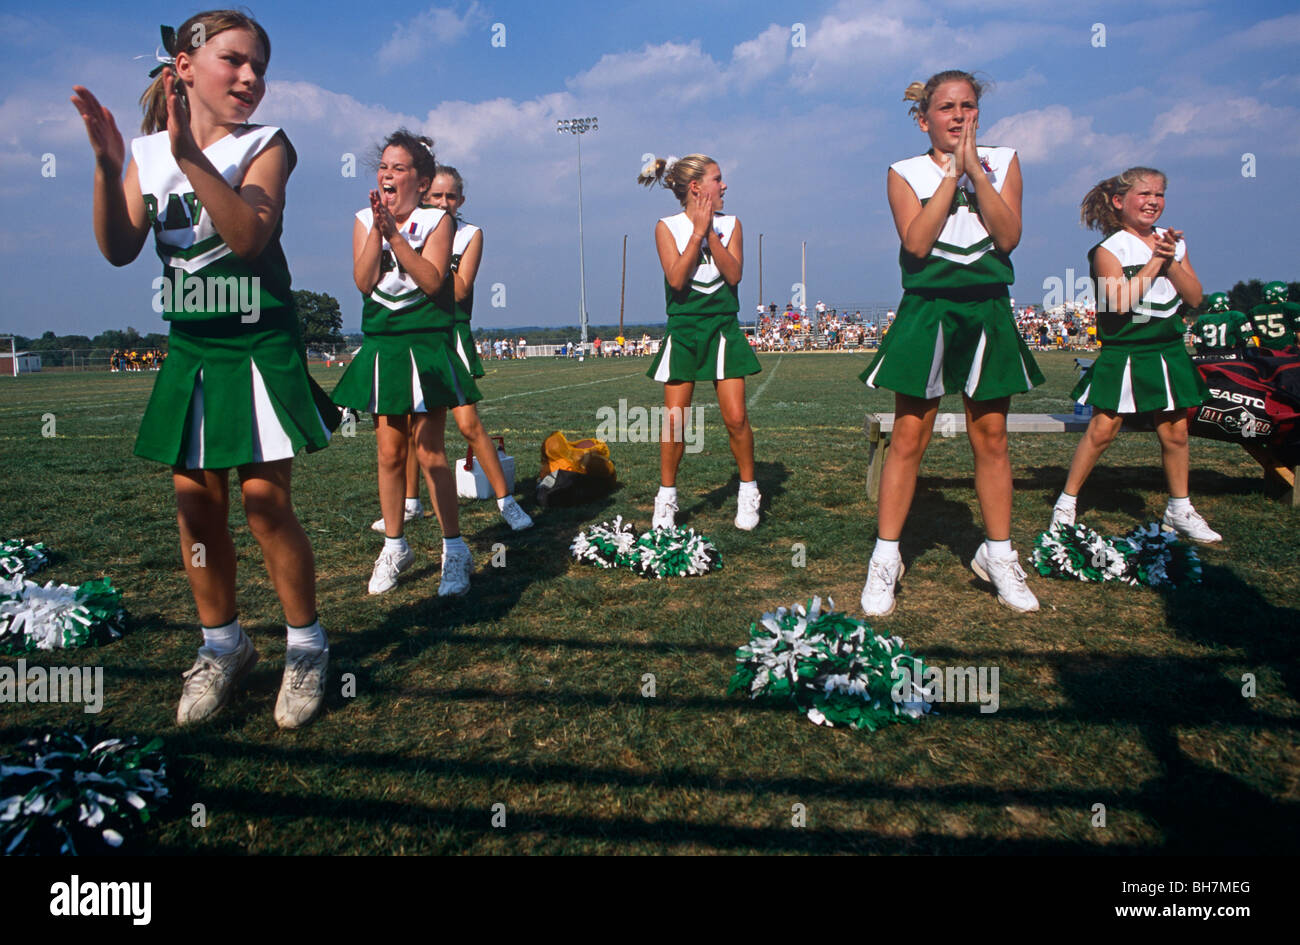 Young cheerleaders jump off the ground together during a Saturday morning High School football match in Mount Joy, Pennsylvania. Stock Photo